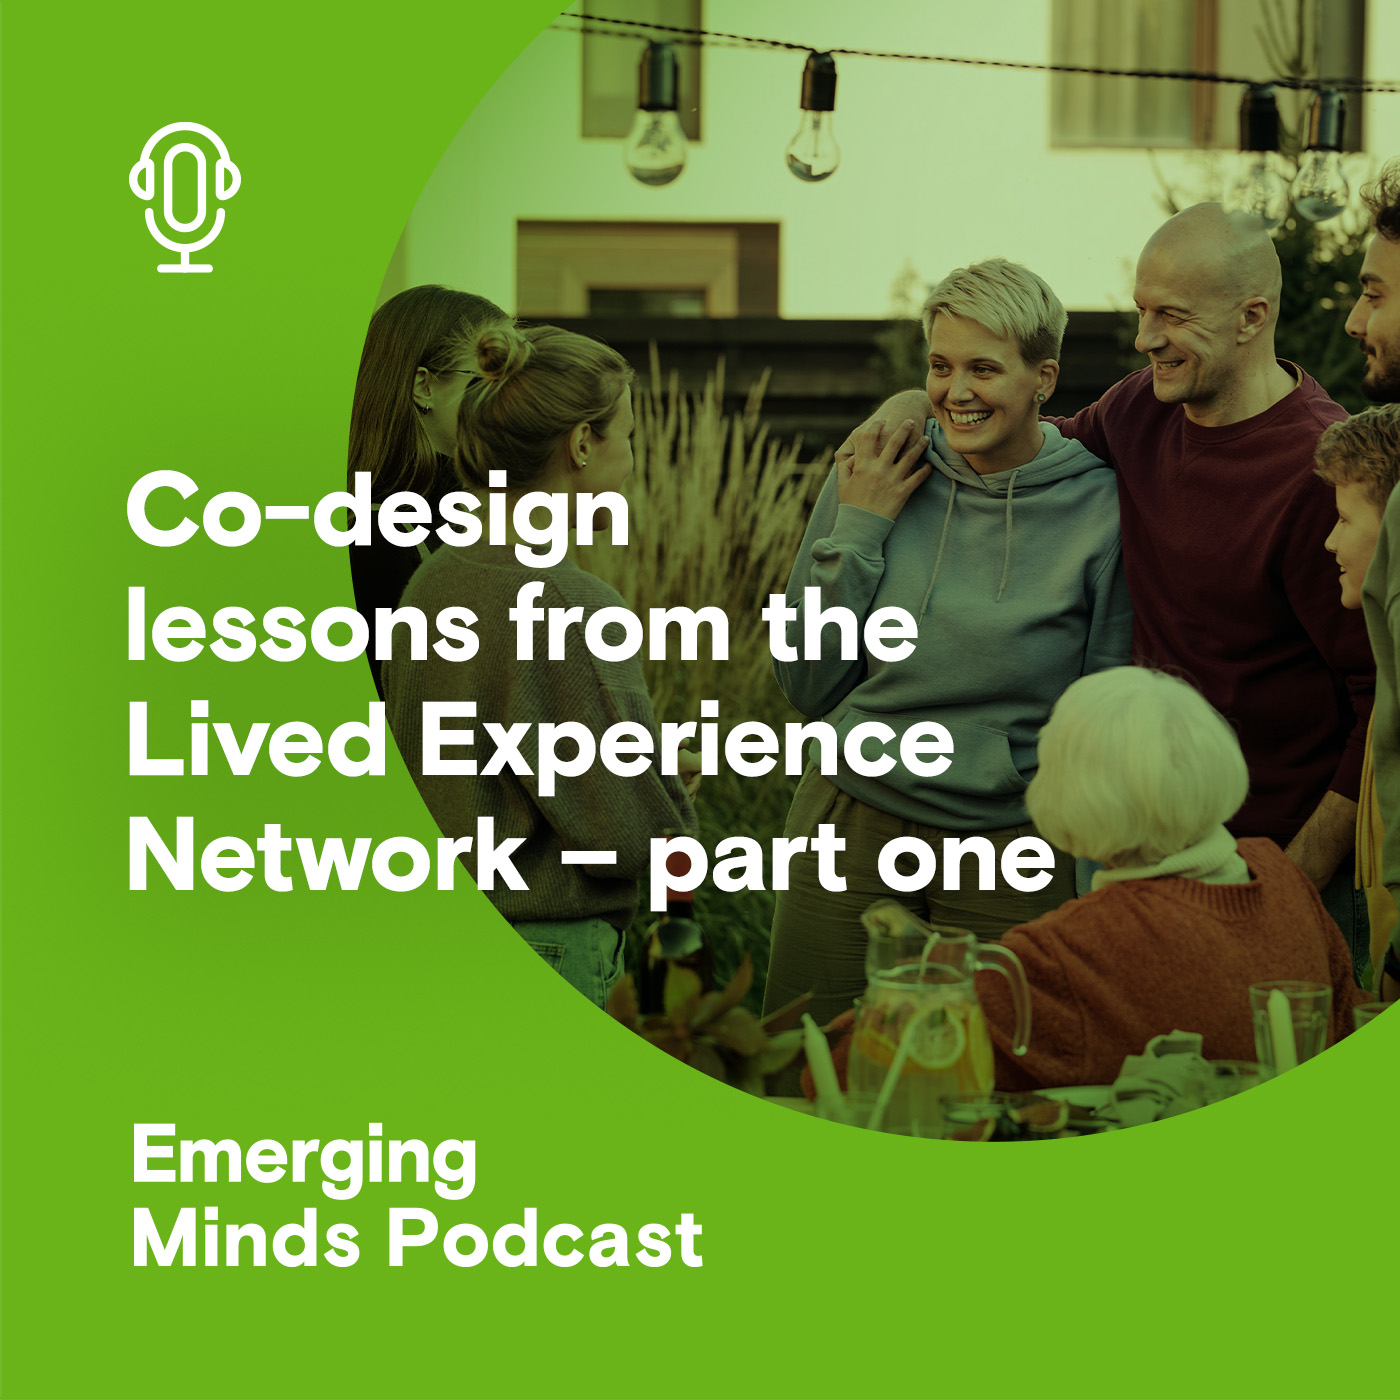 Co-design lessons from the Lived Experience Network - part one